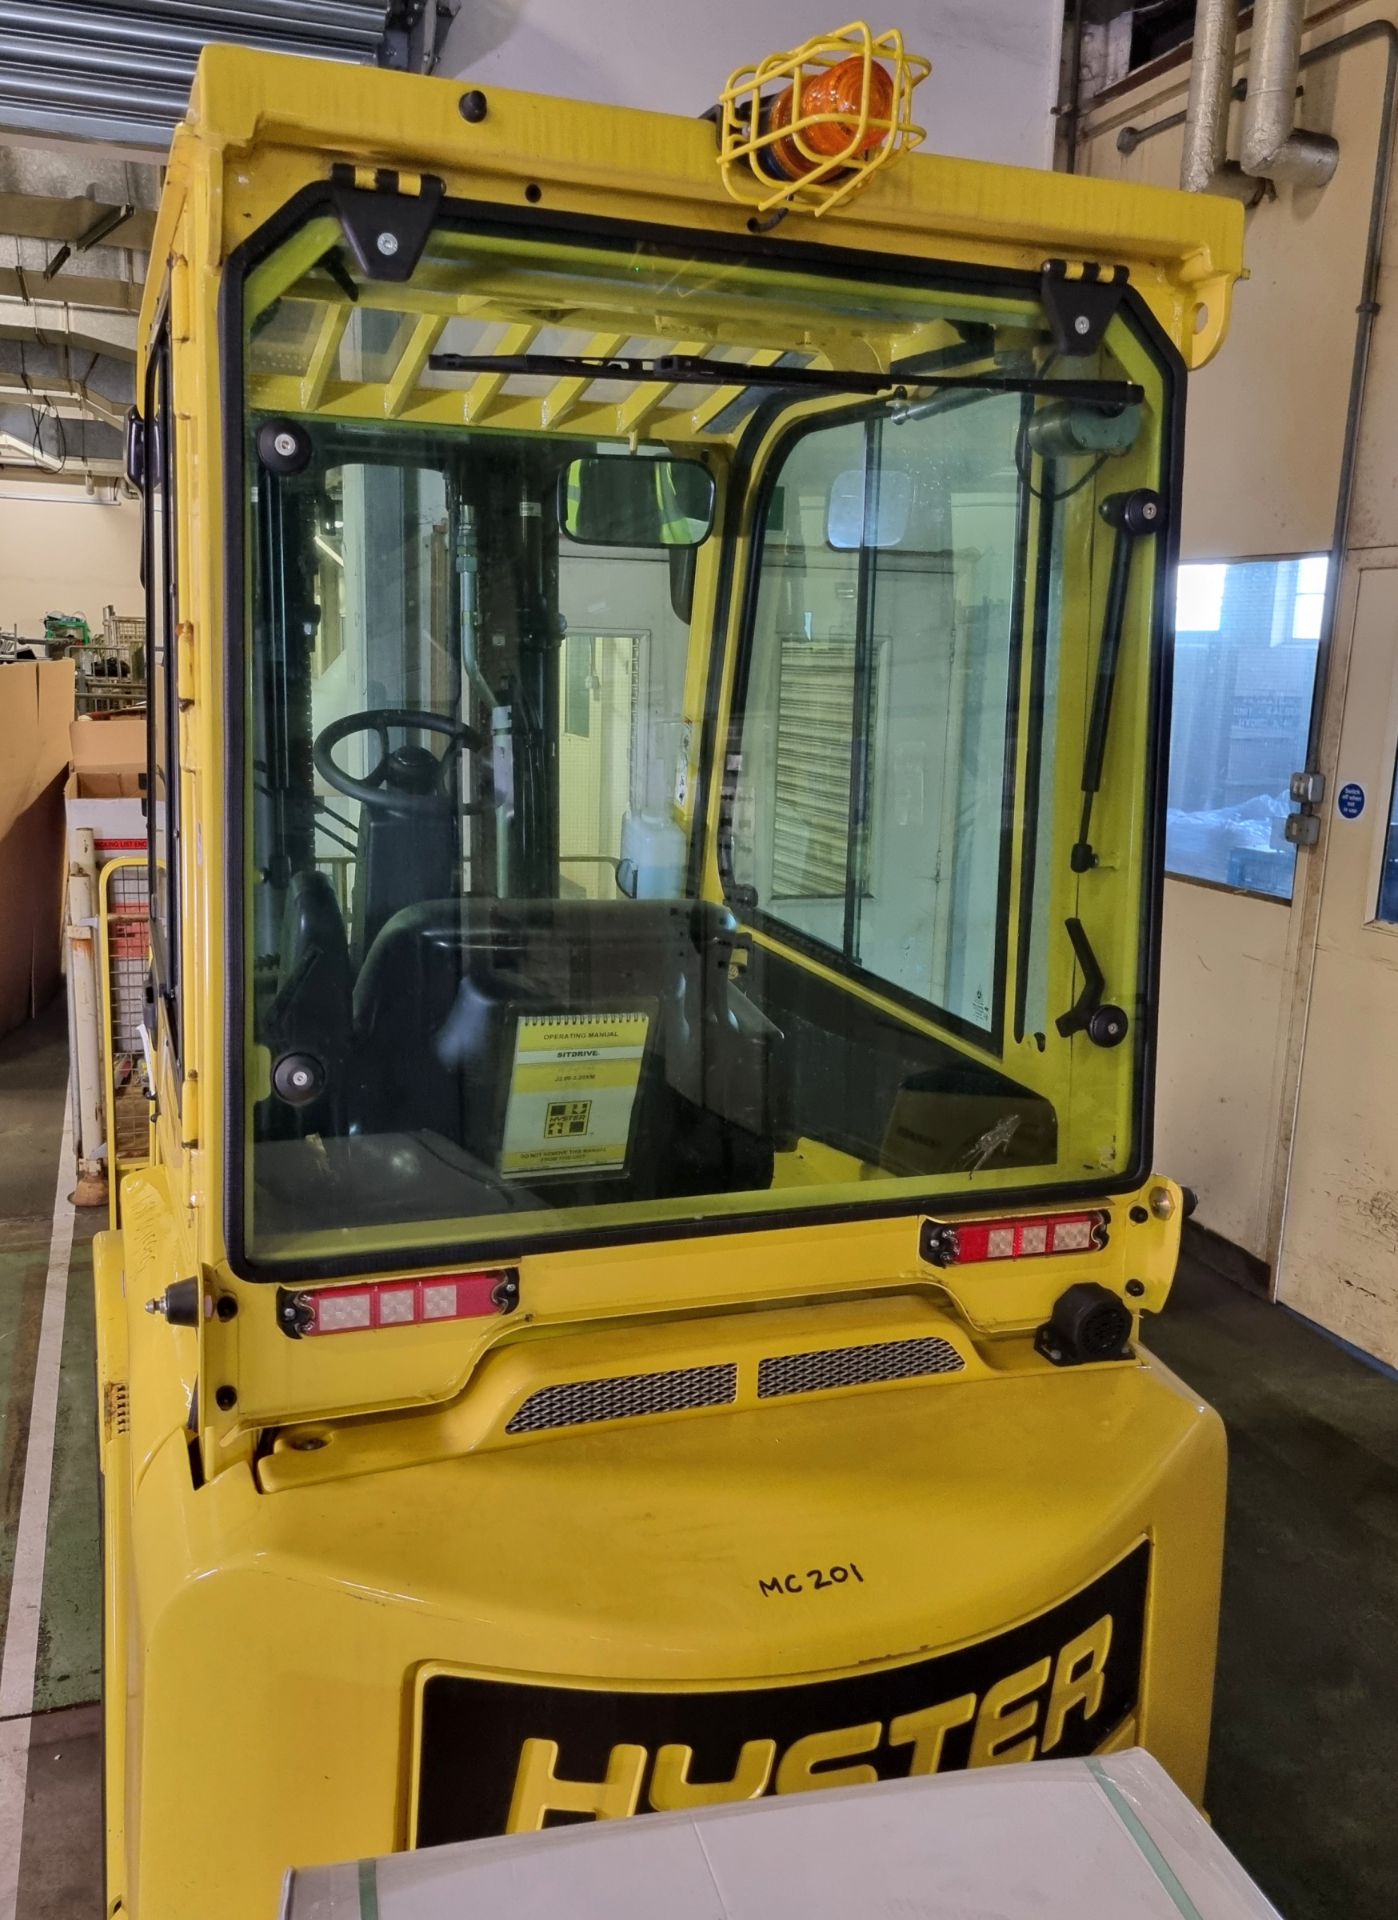 Hyster ACX J2.50XM-717 4-wheel electric forklift truck - full details in the description - Image 5 of 21